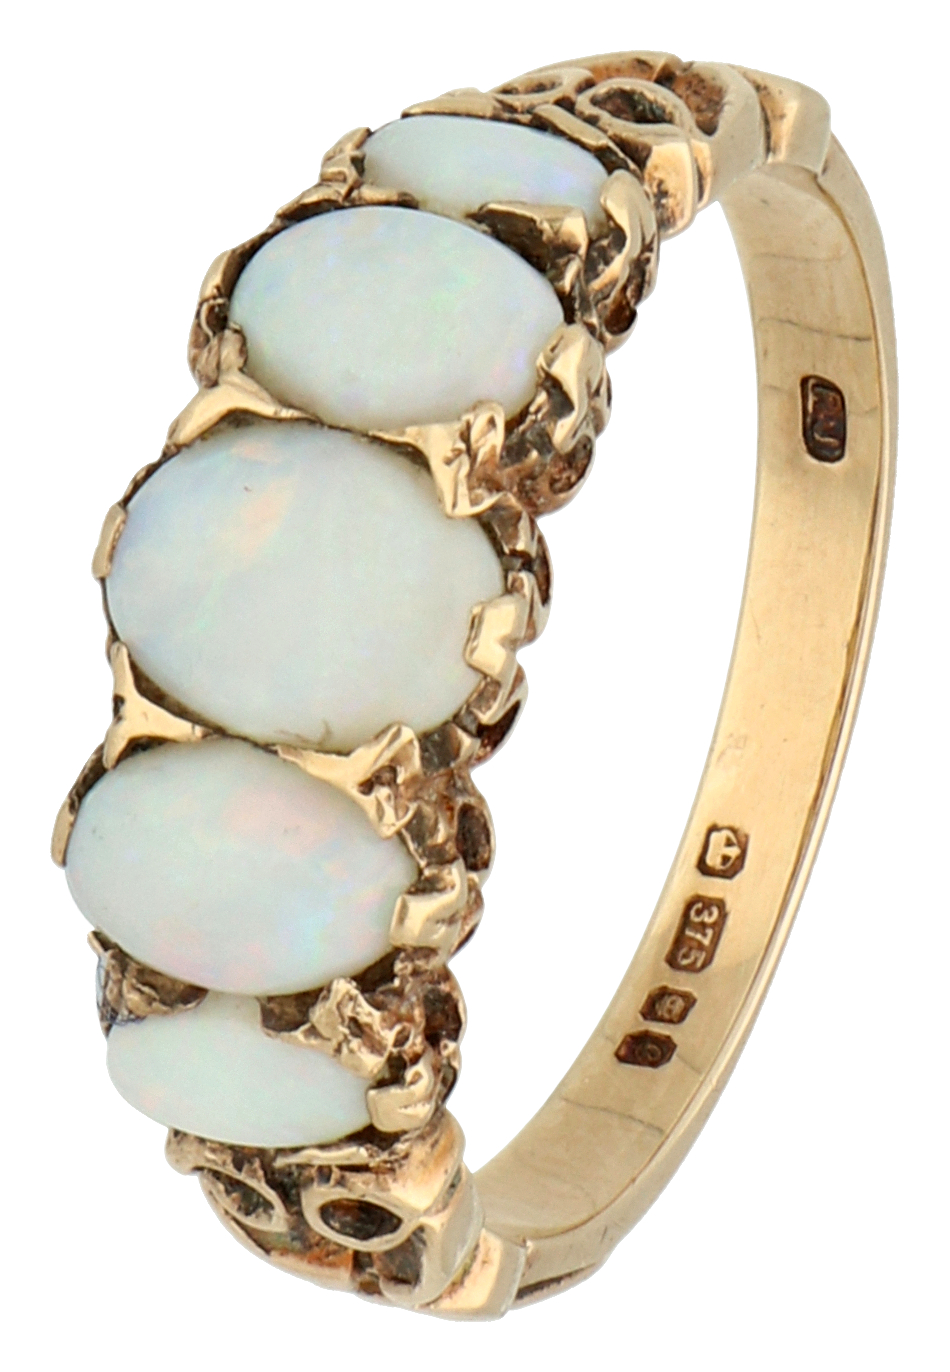 No Reserve - 9K Yellow gold five row ring with cabochon cut opals.